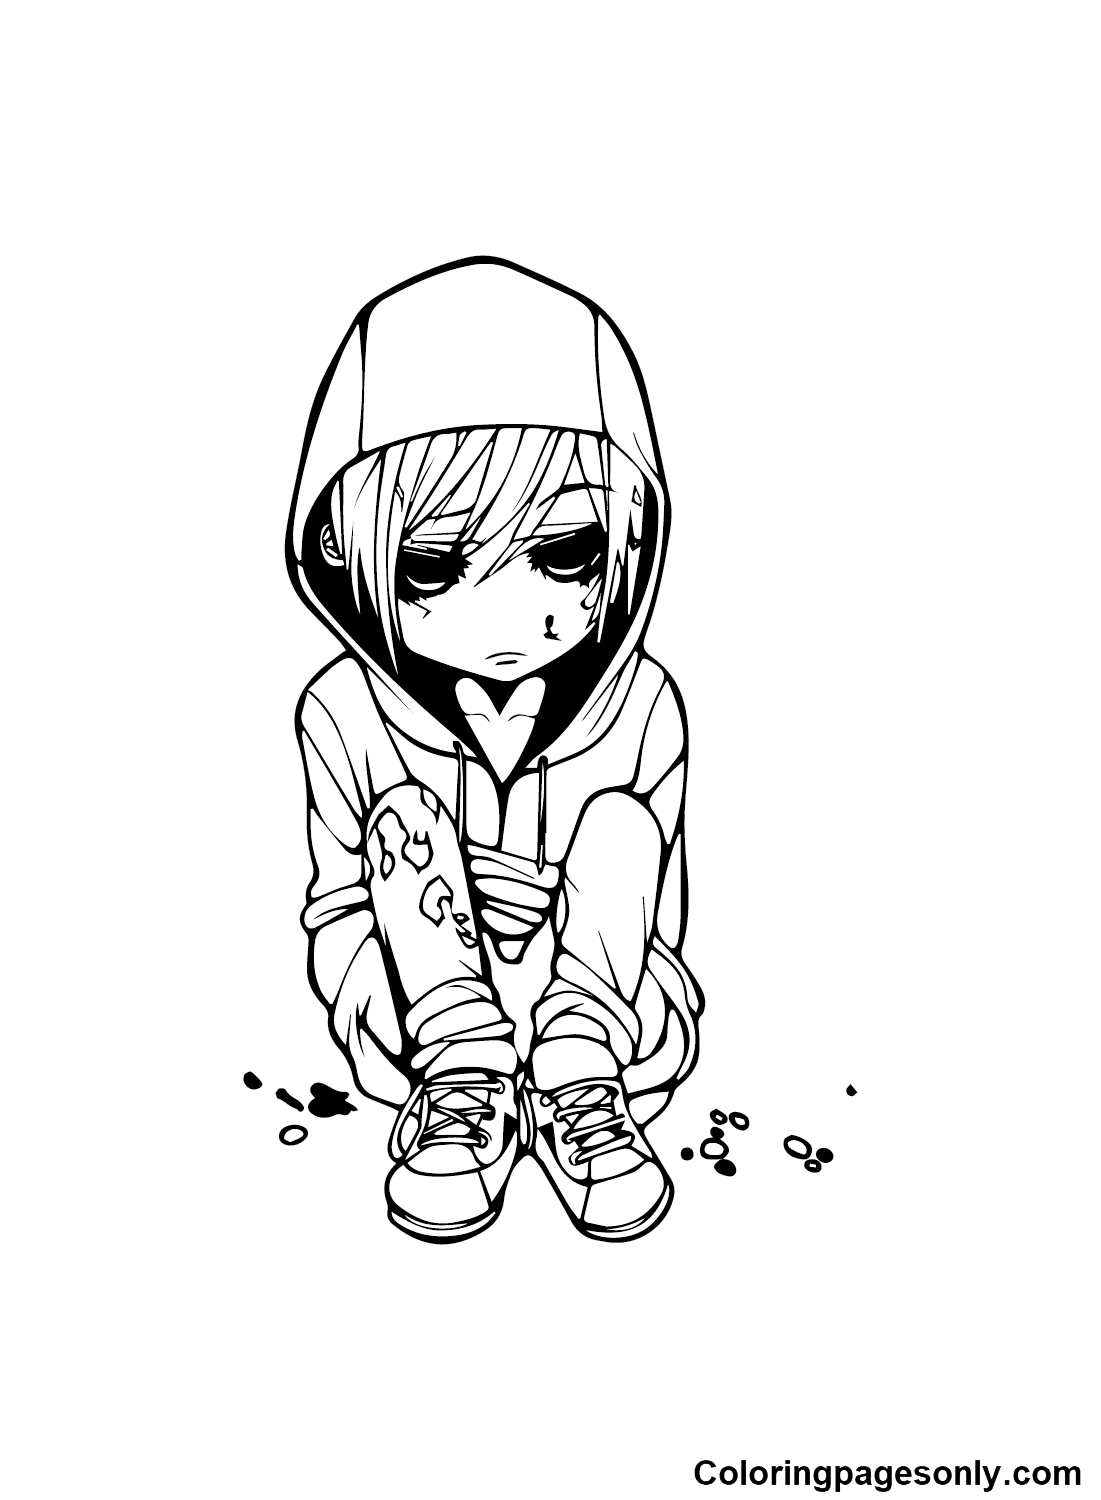 Emo to Download Coloring Pages